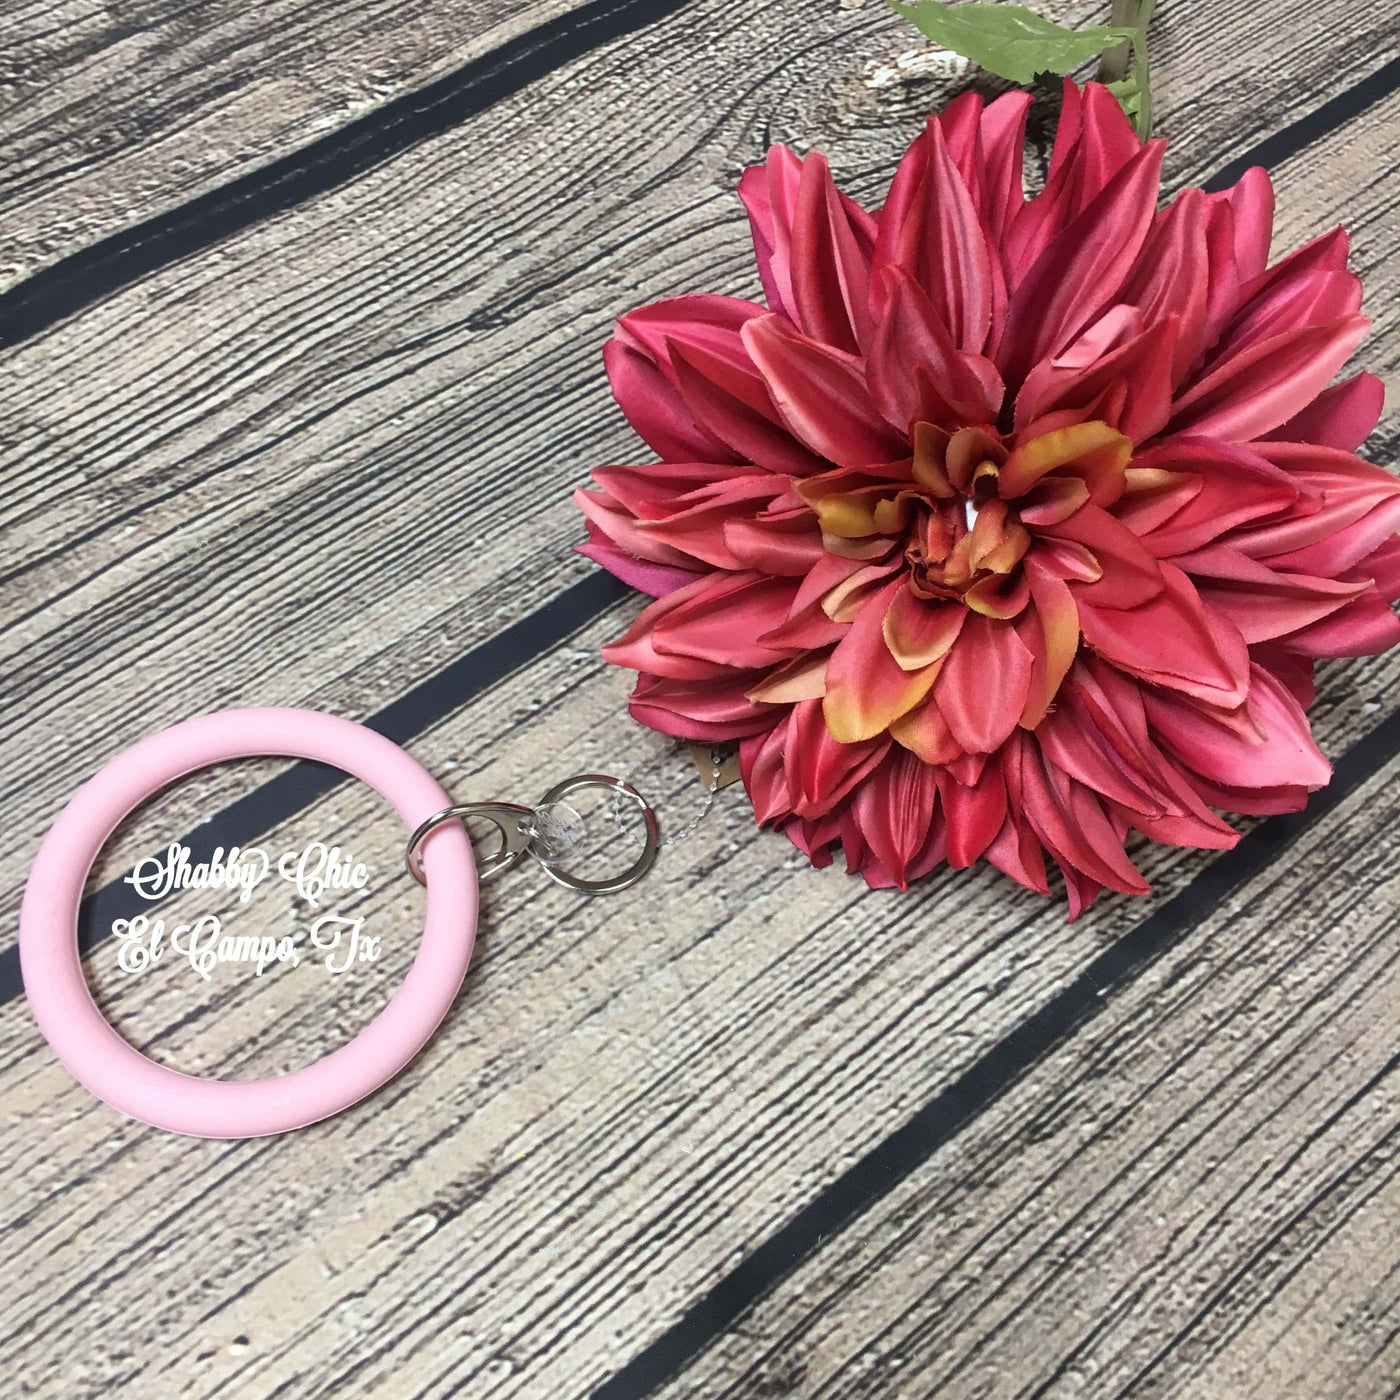 Silicone Bracelet Key Ring Shabby Chic Boutique and Tanning Salon Blush Pink